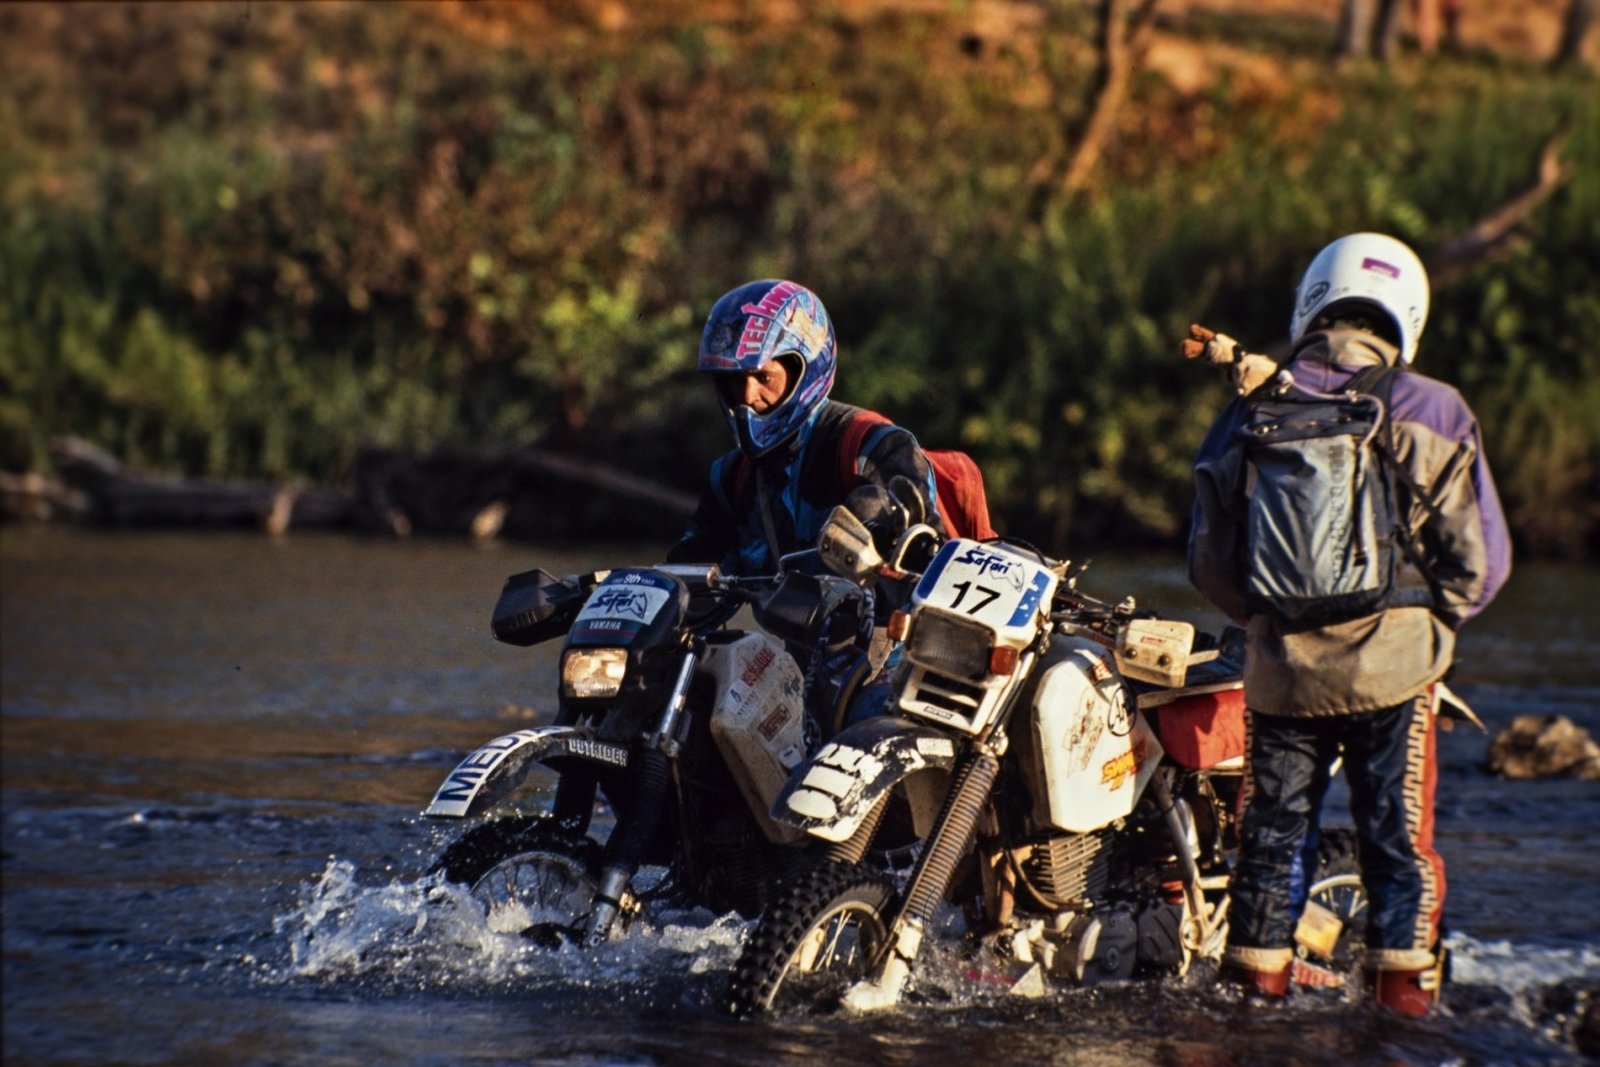 Sometime, my job was to cross a river riding a motorcycle (Australian Safary 1992). My motivation was to get as close as possible to the race while preserving my camera